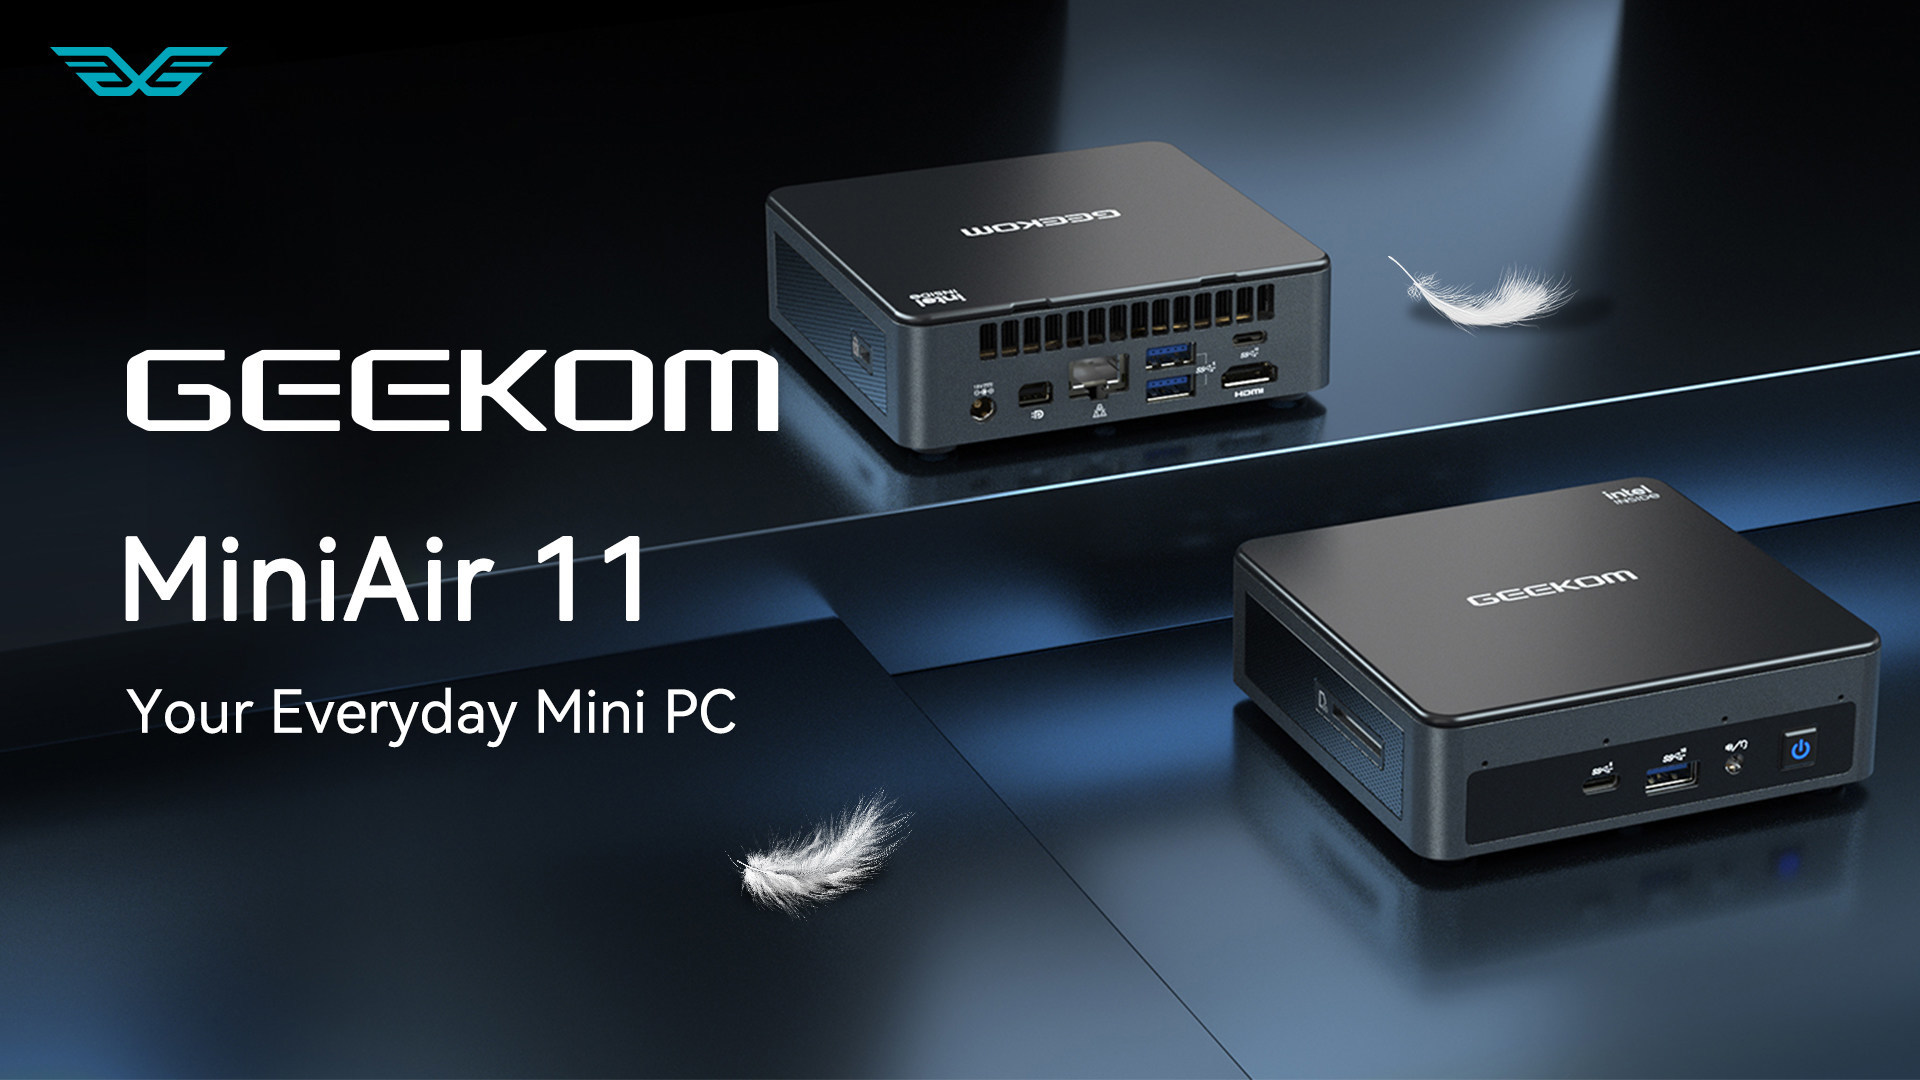 GEEKOM launches its latest MiniAir 11 PC with 11th-gen Celeron